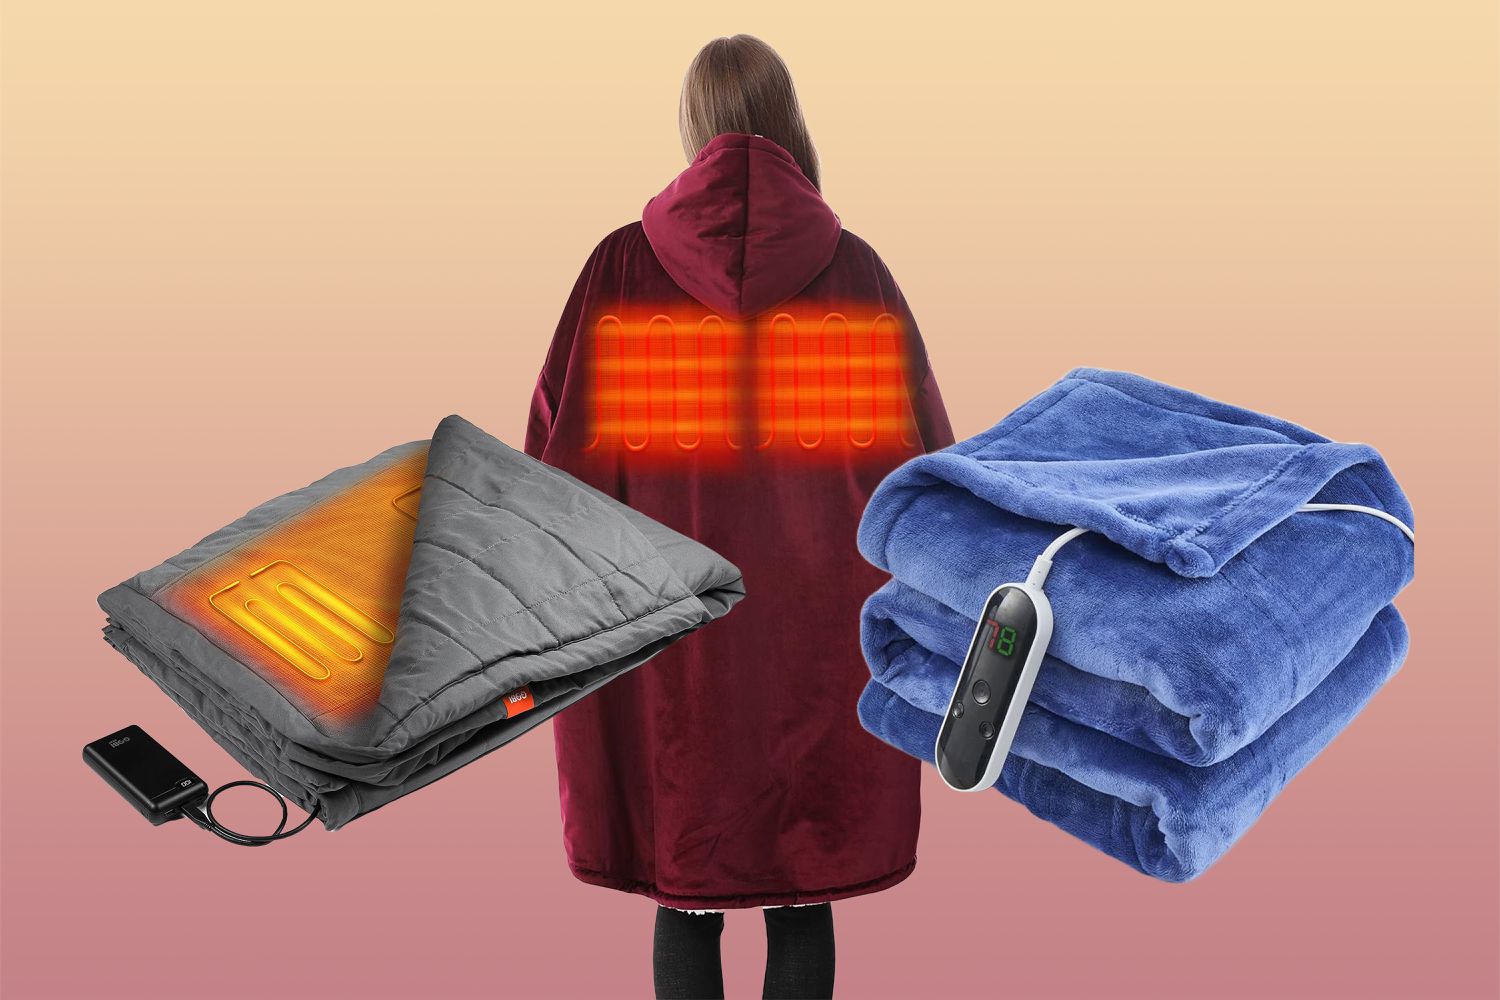 Heated Blanket Review: Stay Warm and Cozy All Winter